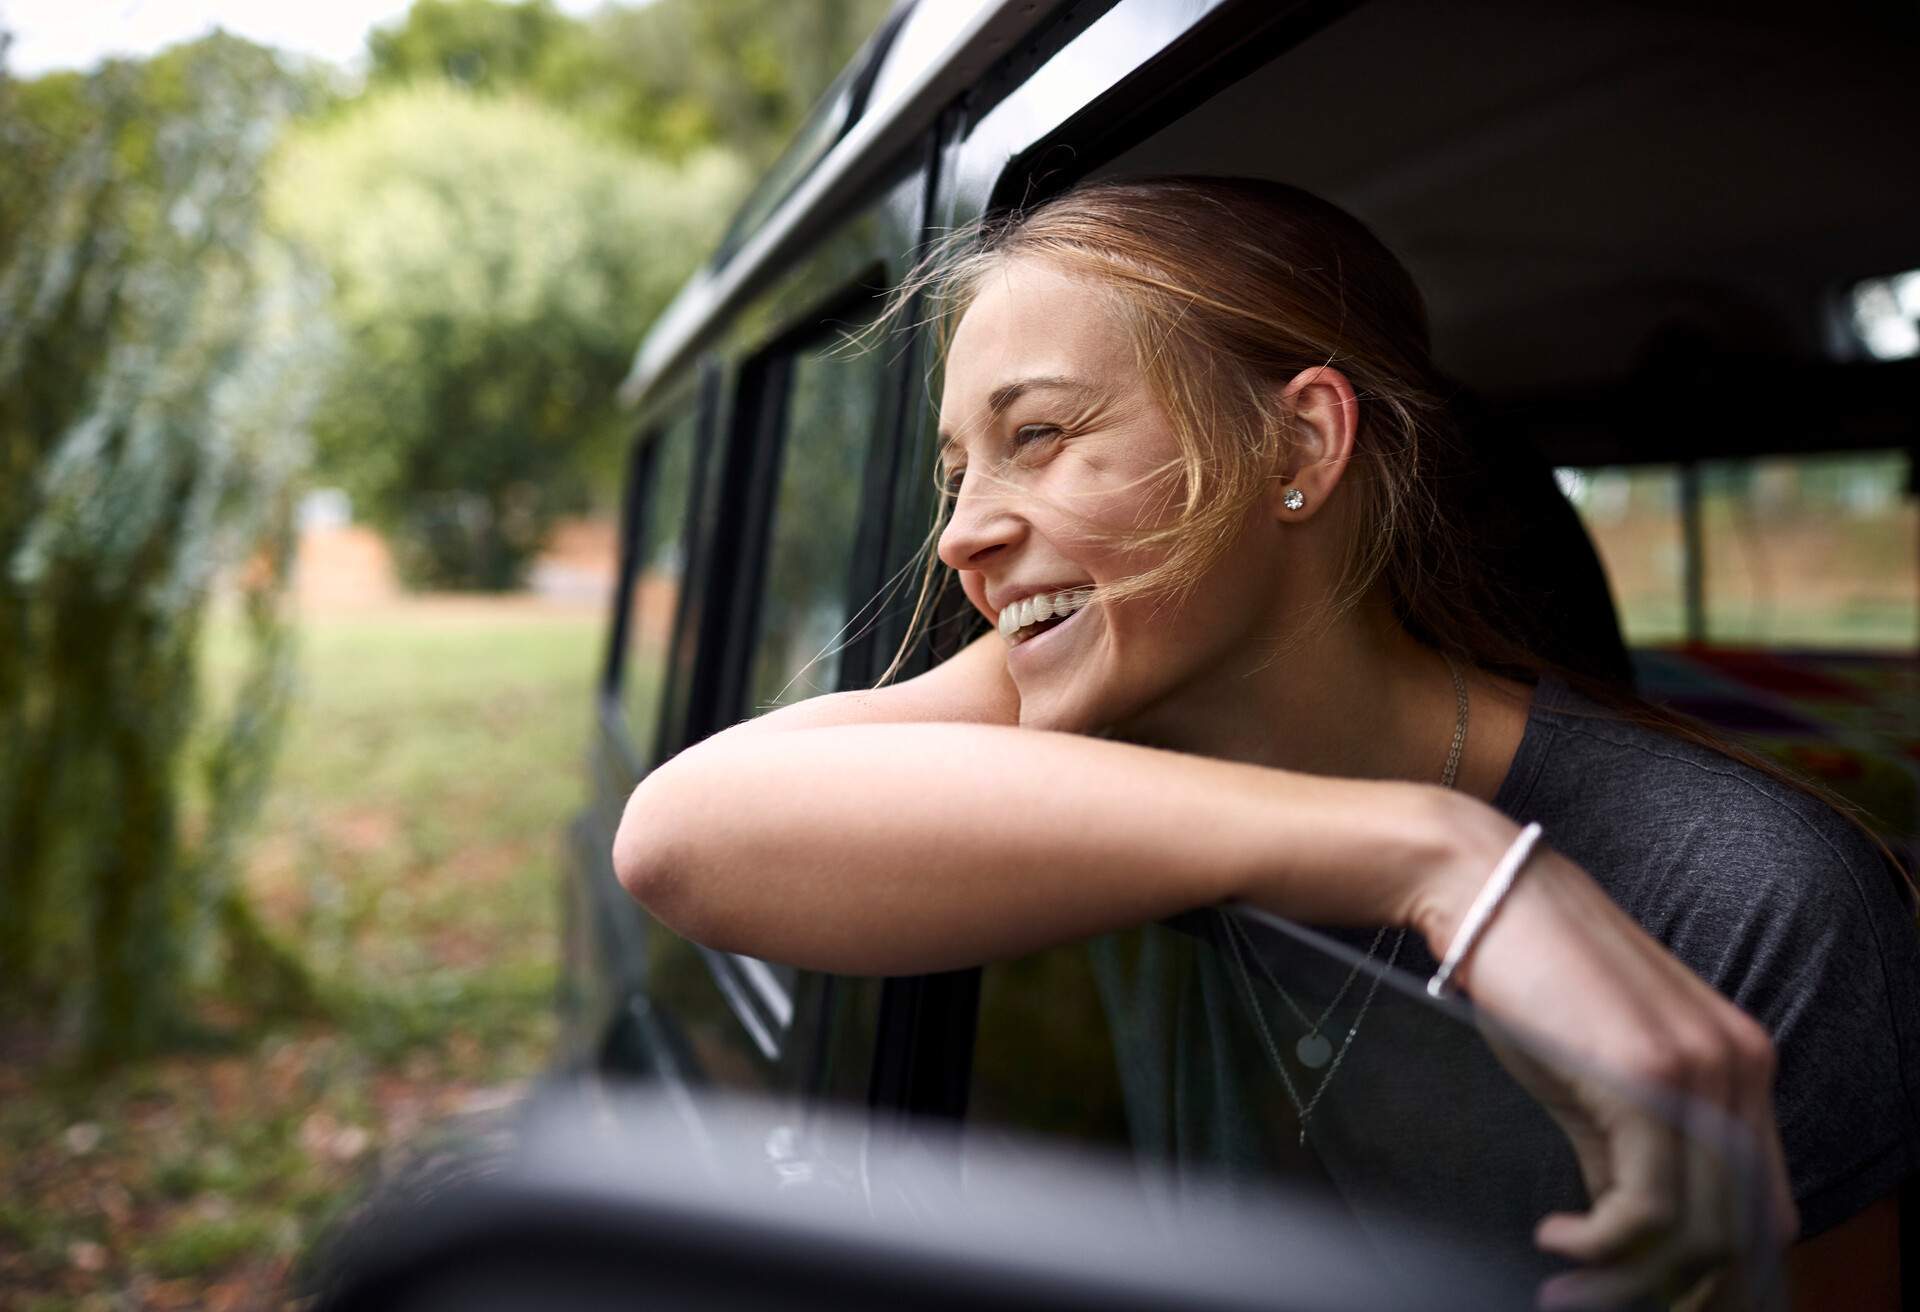 Smiling woman in a car looking outside the window